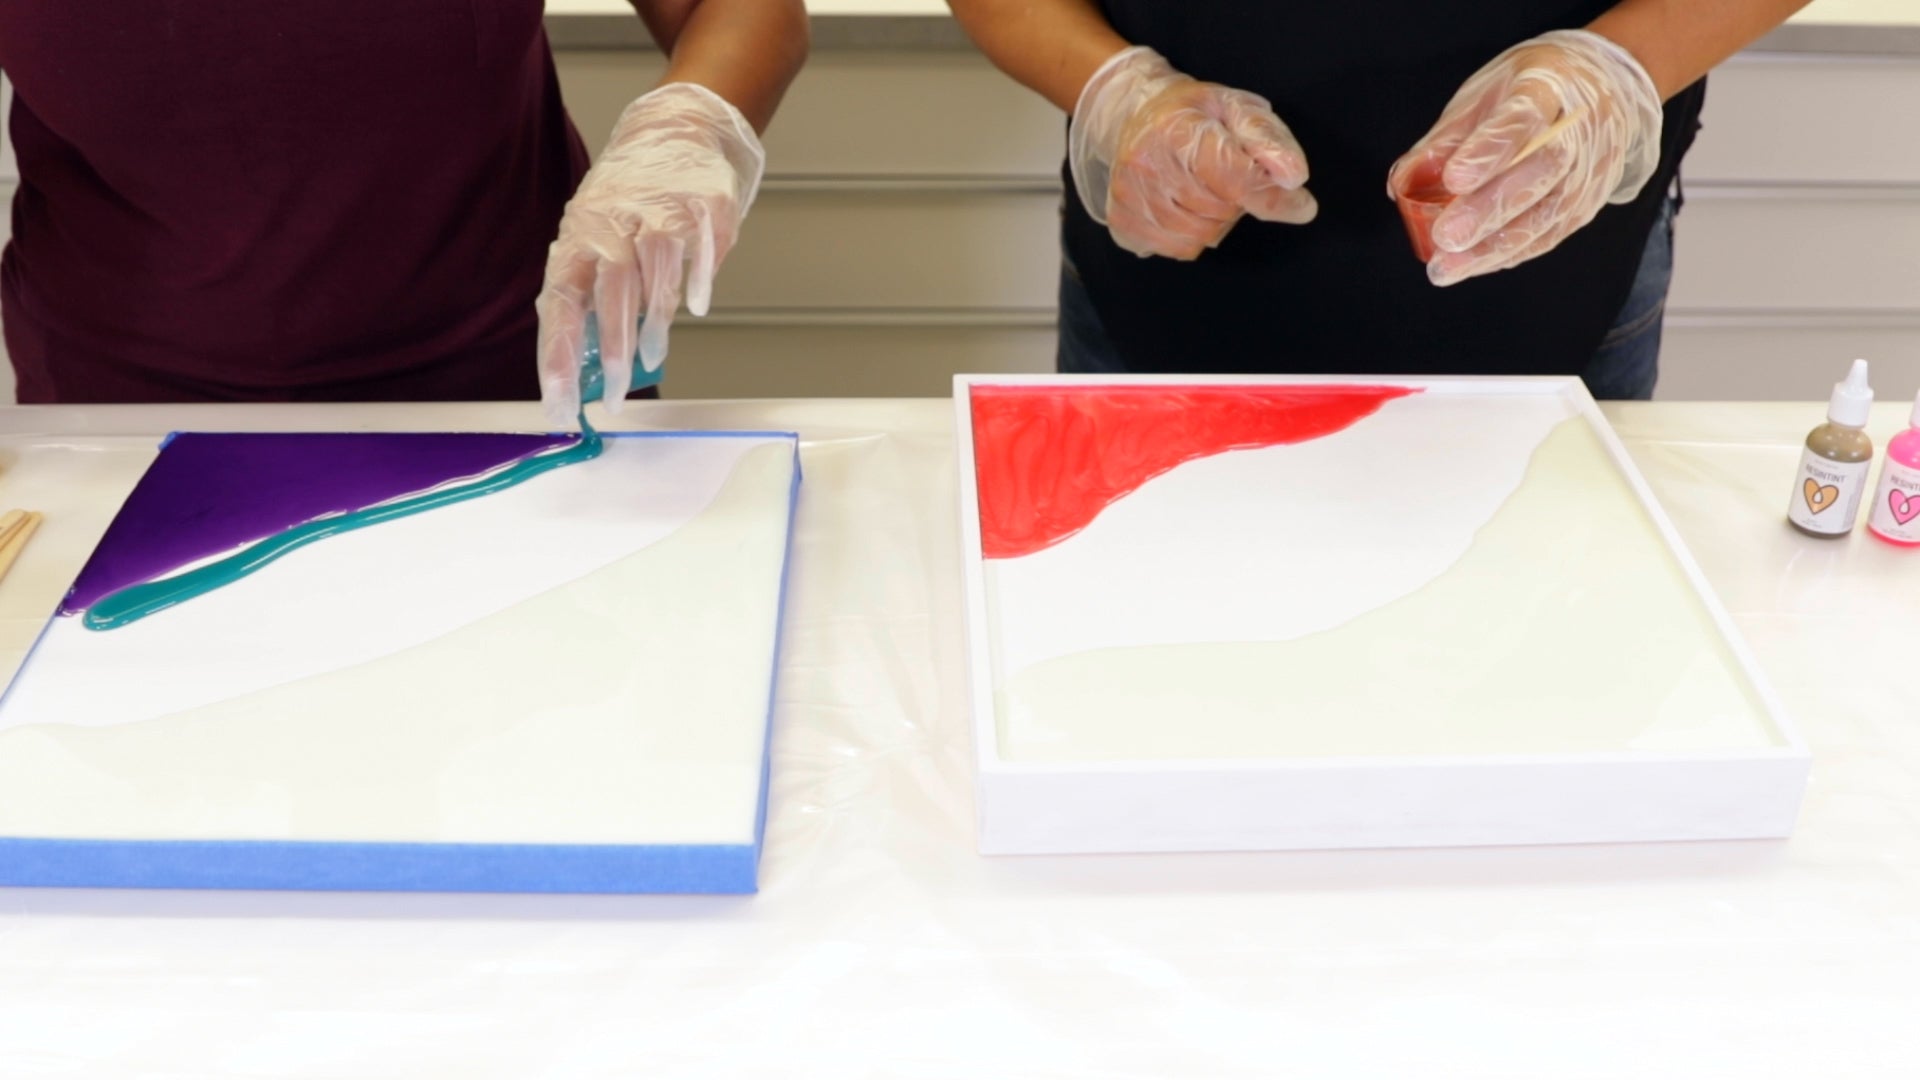 Create Resin Flow Art - pour your third colour down in a ribbon fashion